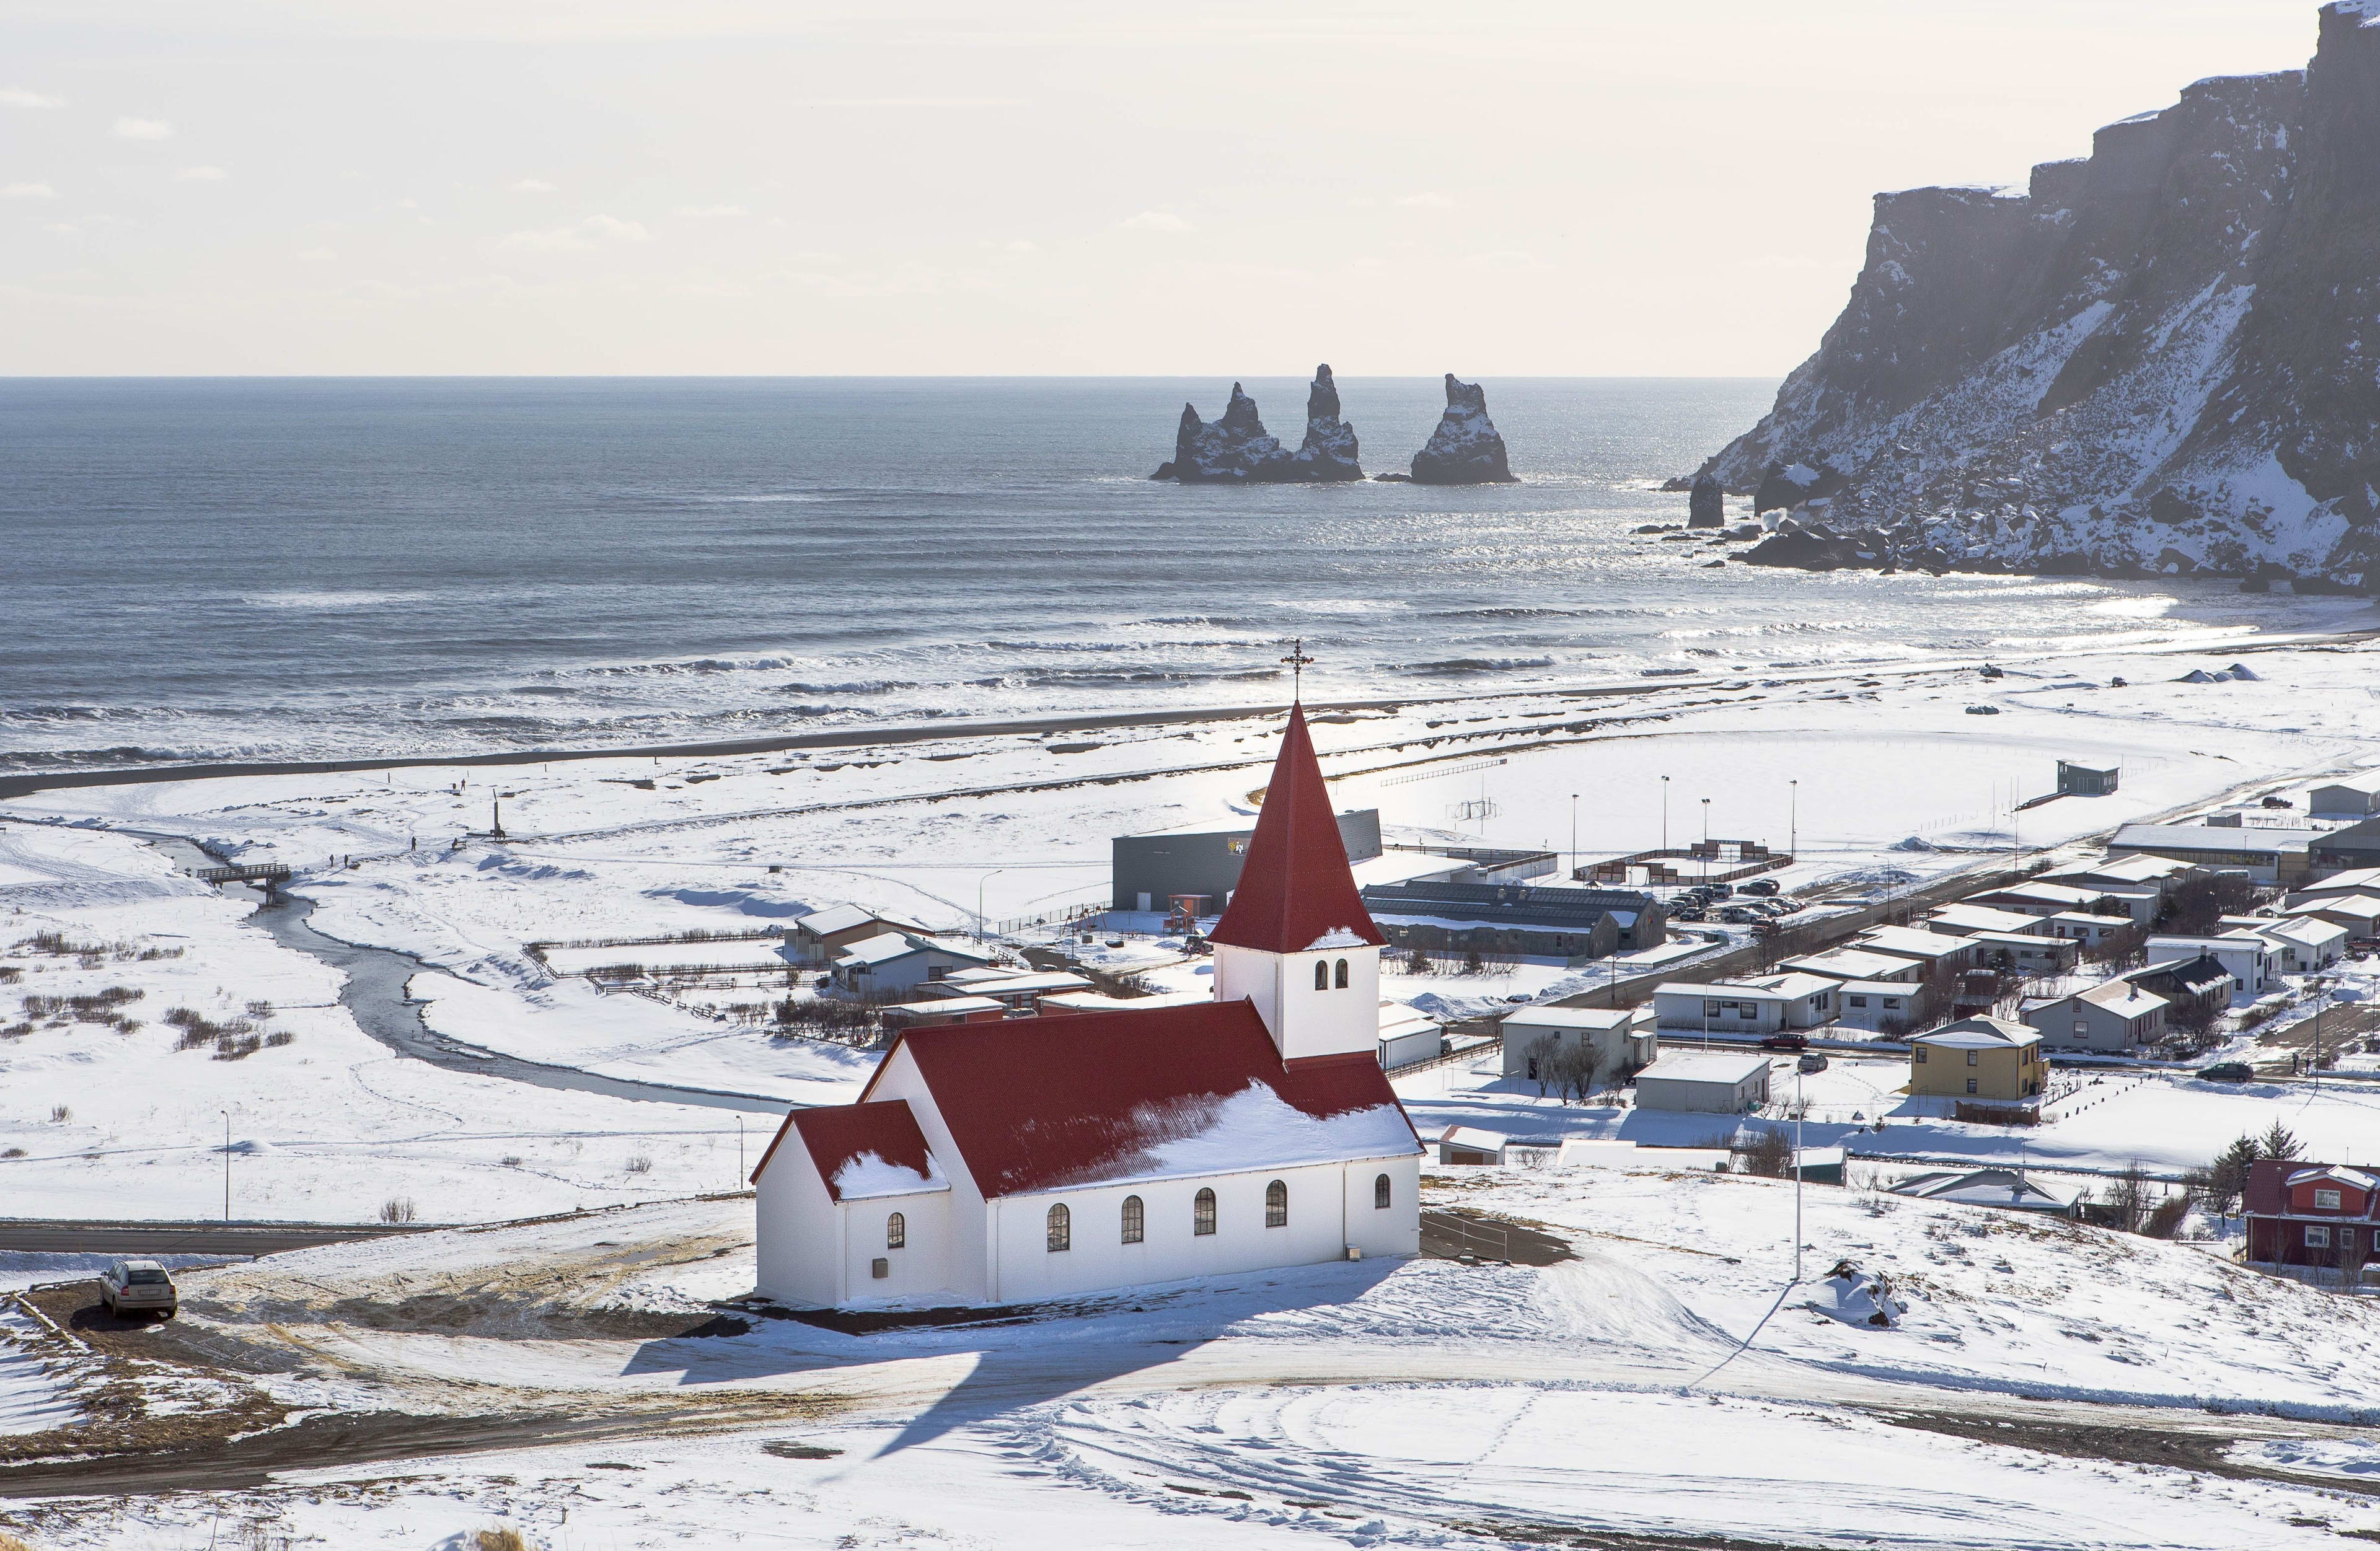 vik town and its red church in winter